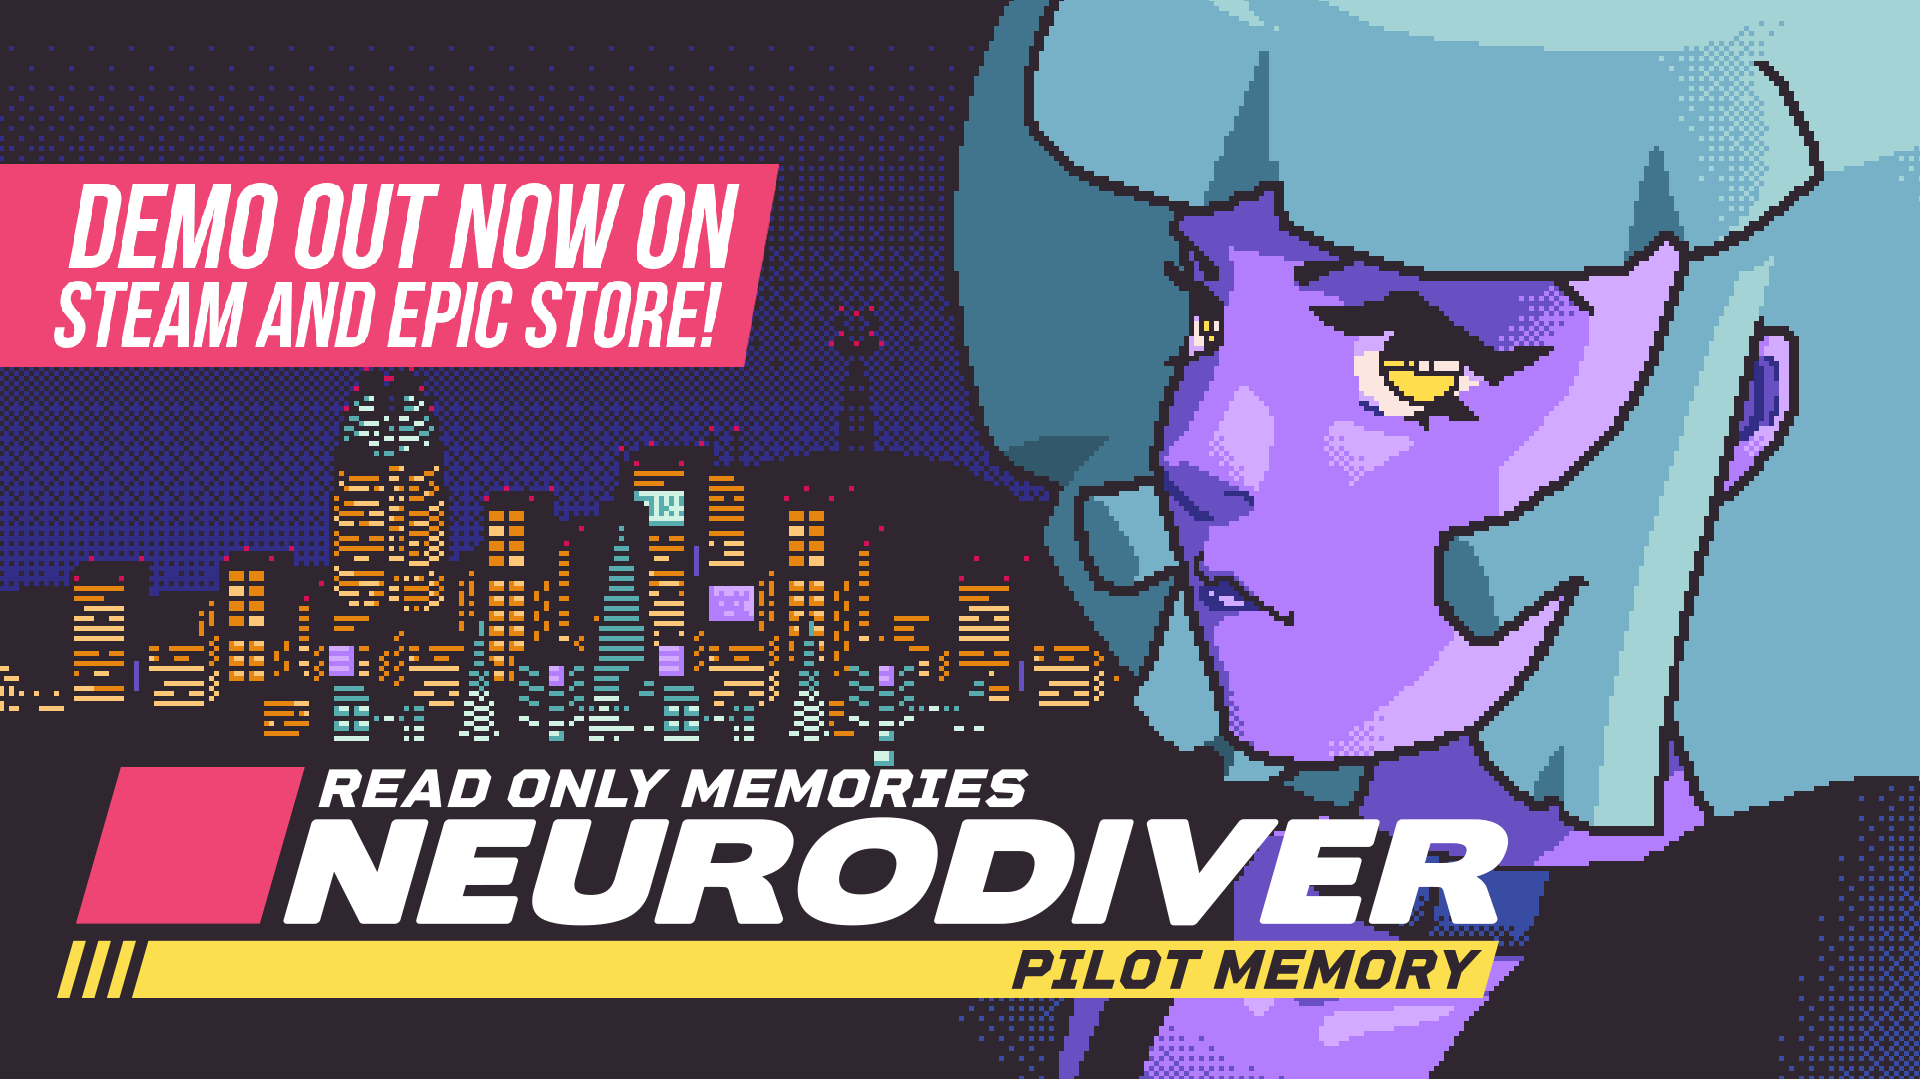 Read Only Memories On Our Neurodiver